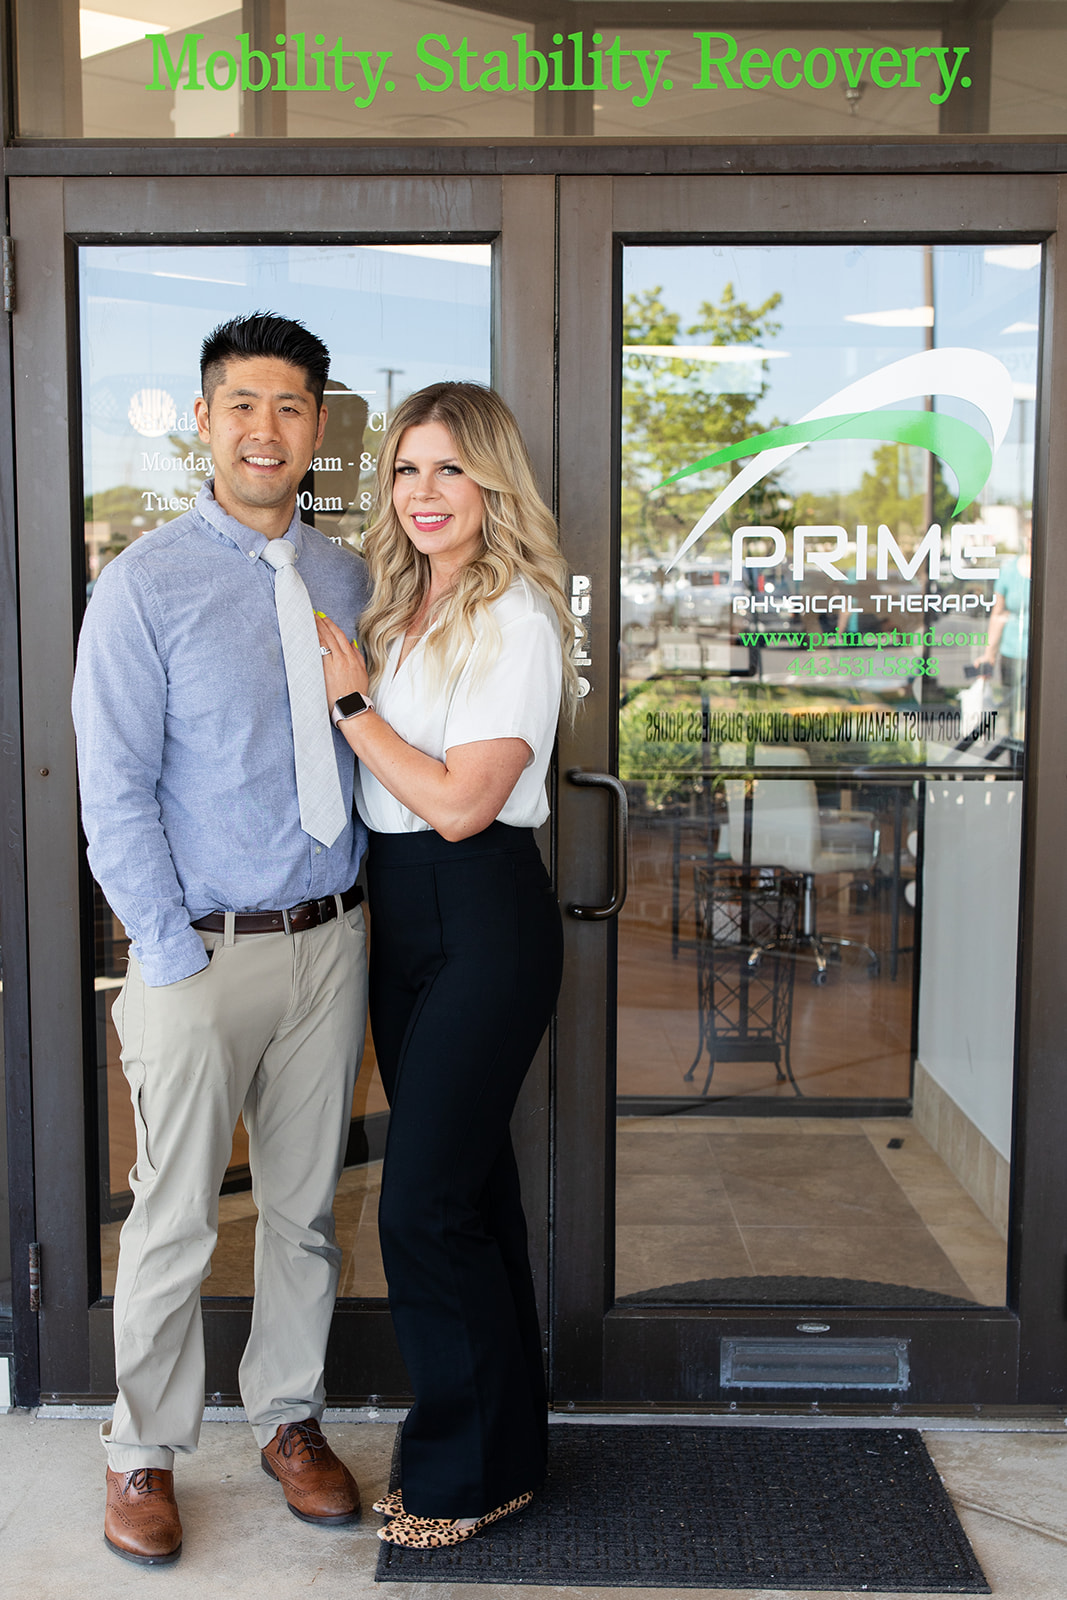 Dr. Won Yoo and Dr. Laura Yoo, a married couple, share the rest of the story about PRIME Physical Therapy in Eldersburg, MD.